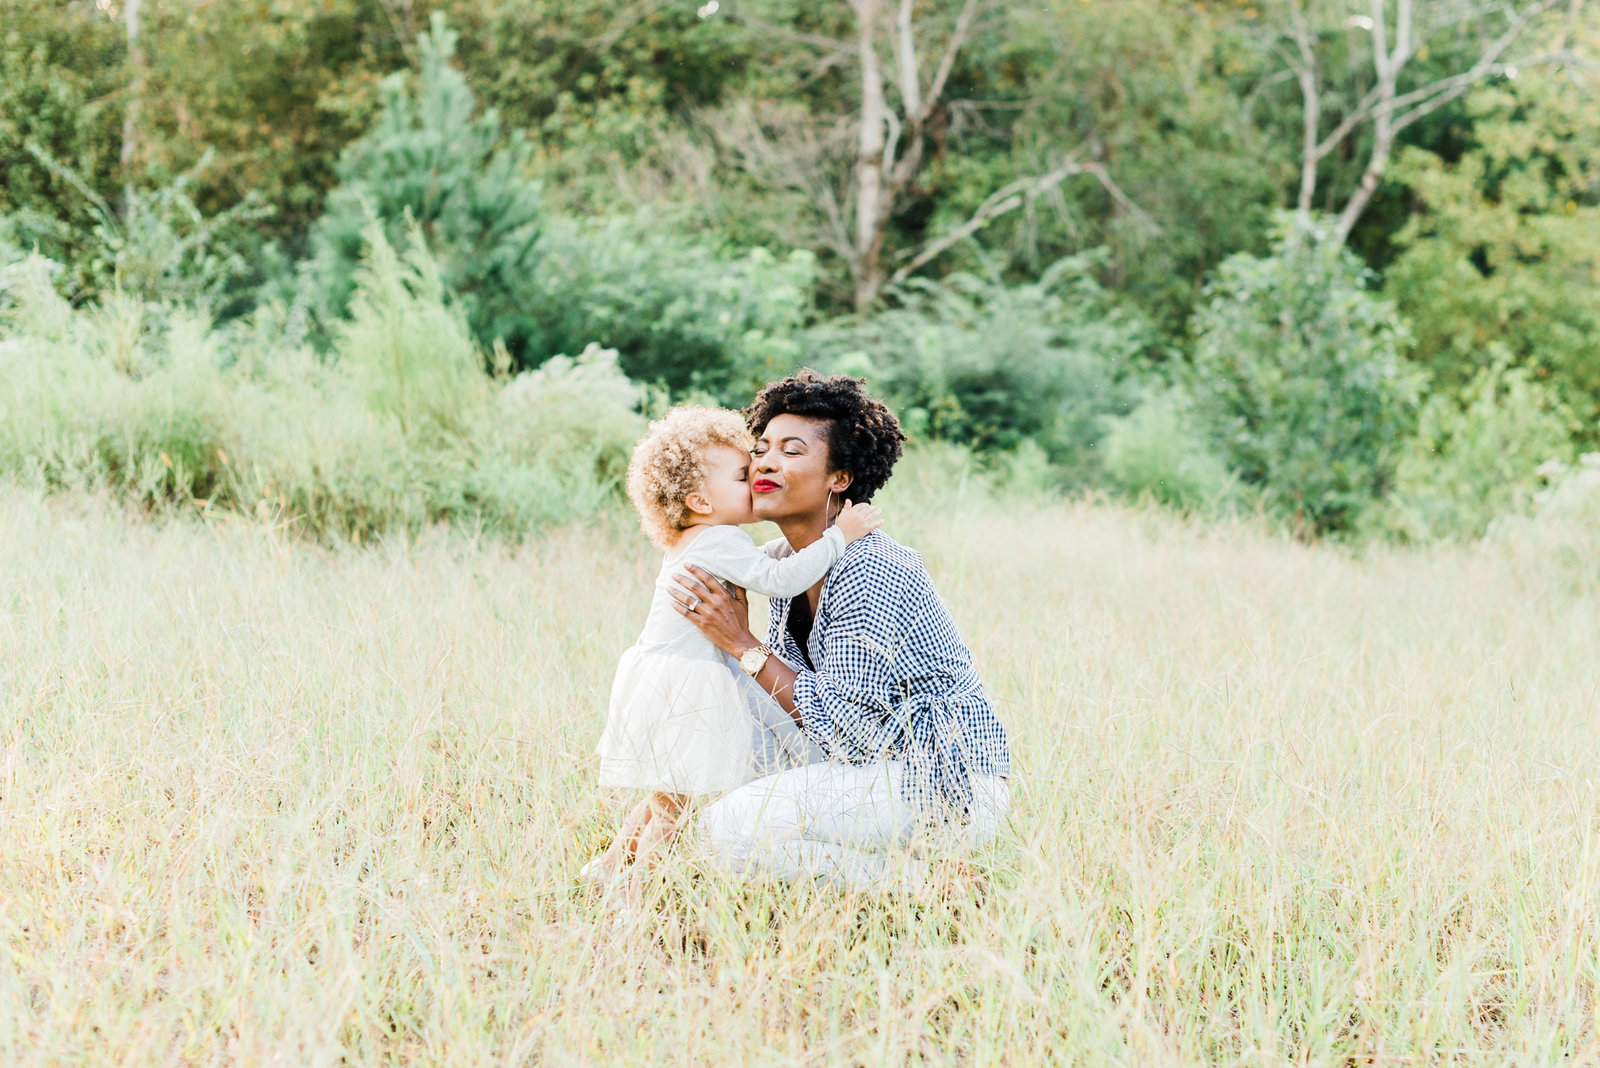 Mom and daughter embracing in a field during their Raleigh family session. Photographed by Raleigh Family Photographer A.J. Dunlap Photography